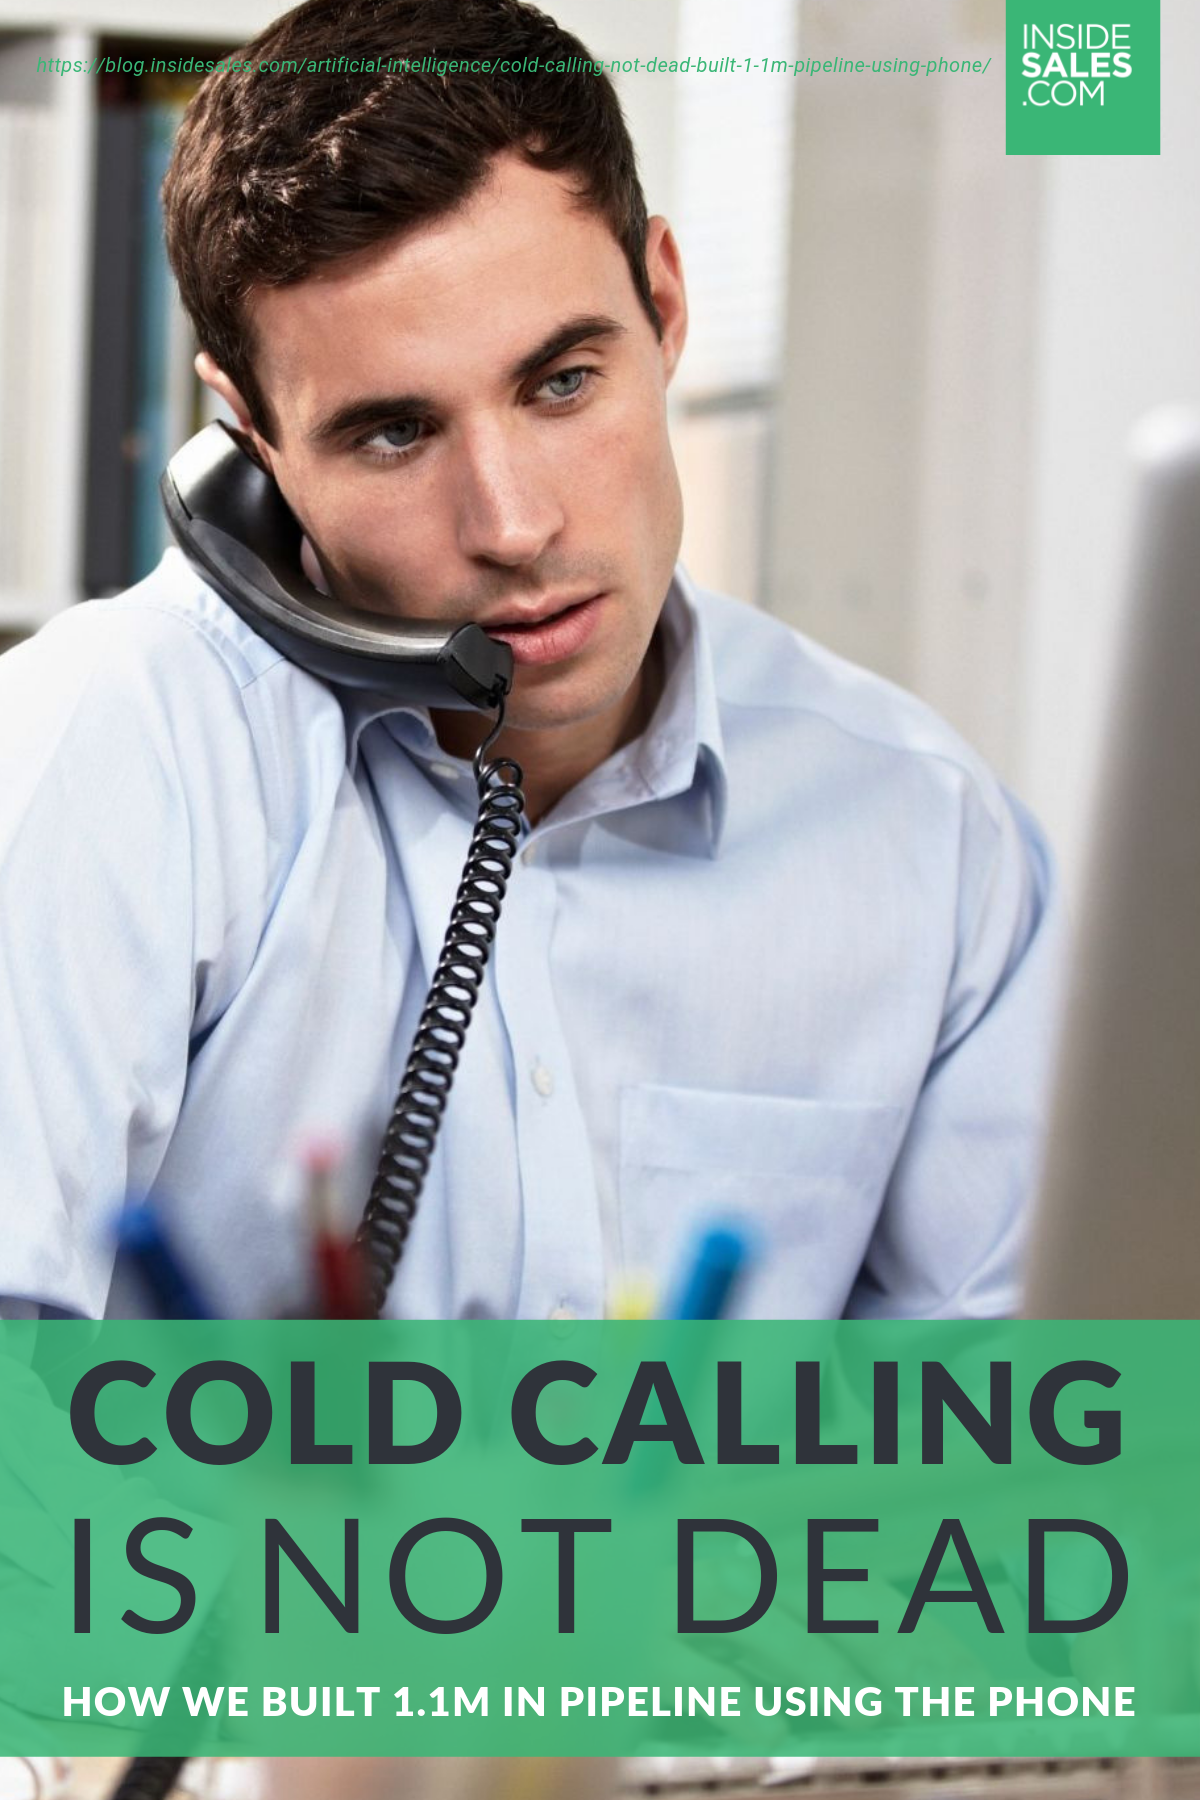 Cold Calling is NOT Dead: How We Built 1.1M in Pipeline Using the Phone https://resources.insidesales.com/blog/artificial-intelligence/cold-calling-not-dead-built-1-1m-pipeline-using-phone/